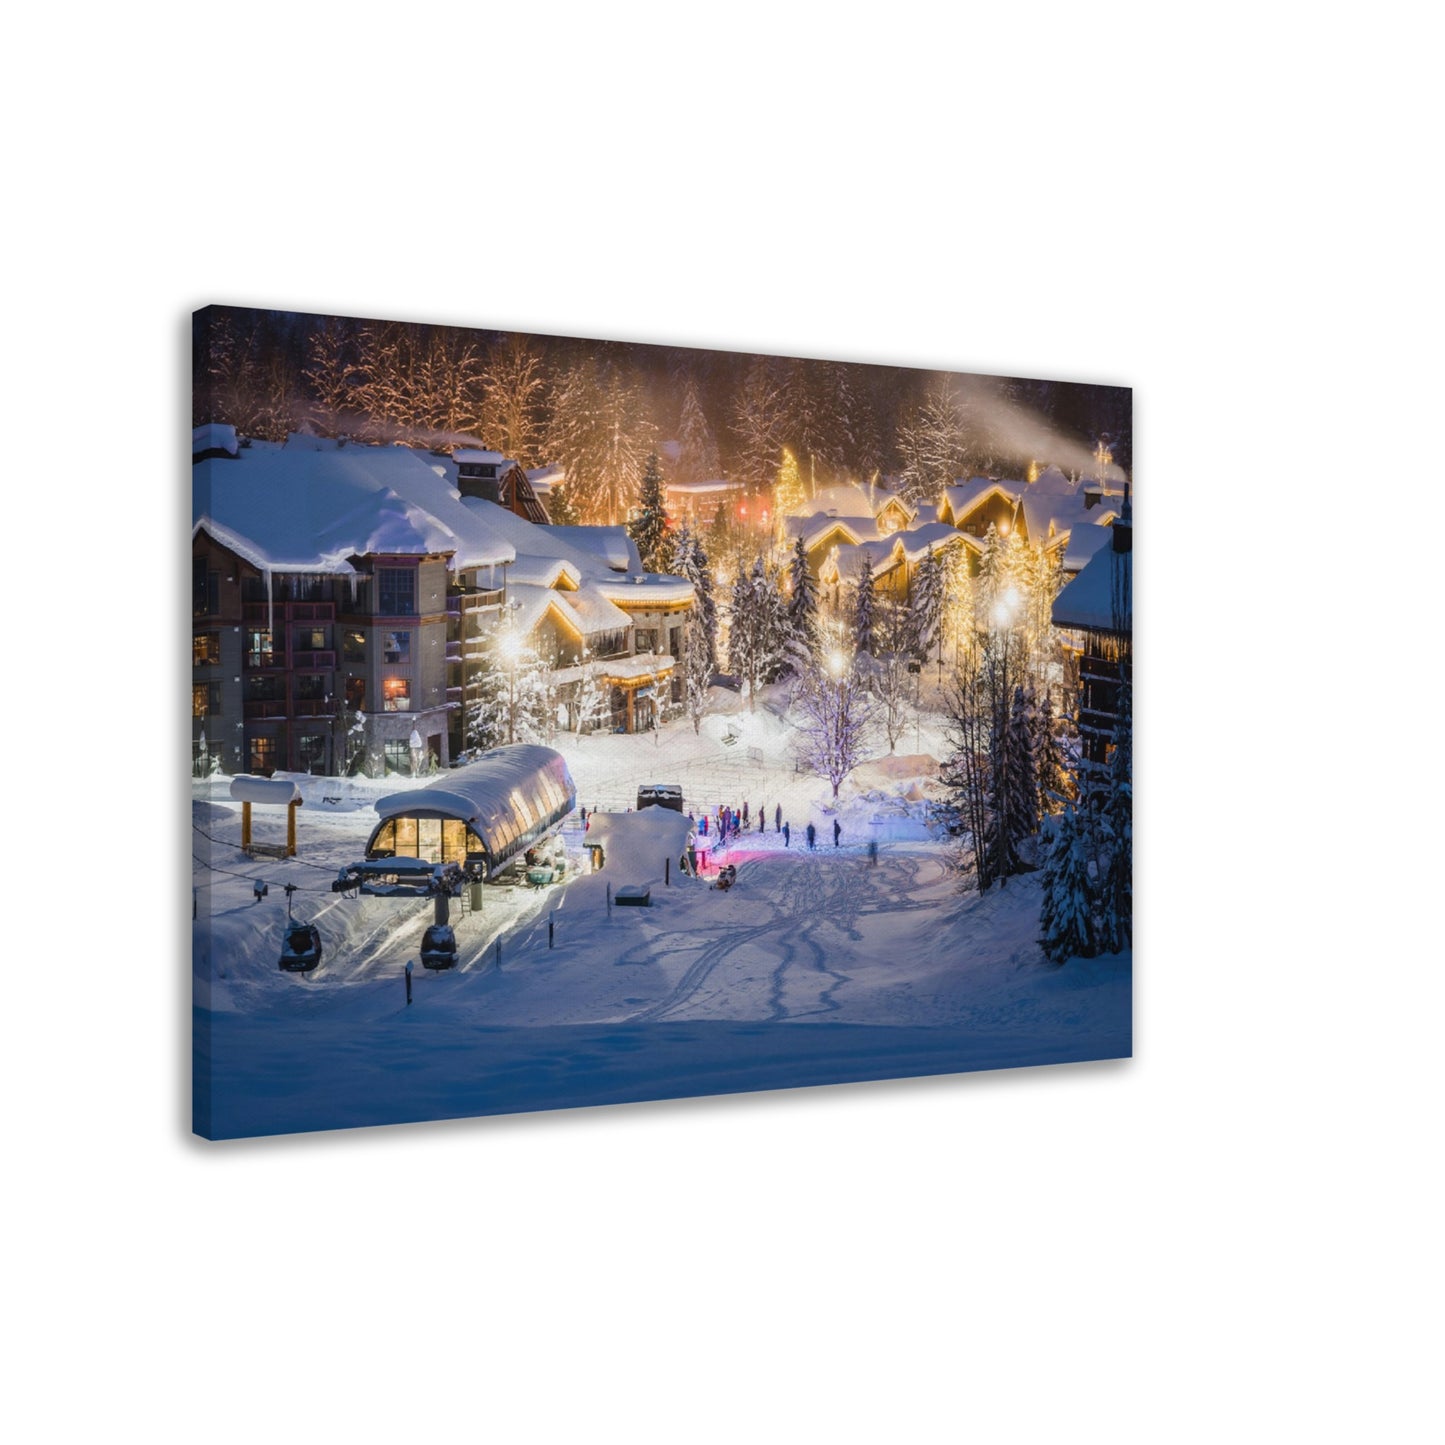 Whistler Creekside Village and Gondola - Early Morning View - Canvas Print - Whistler Blackcomb, British Columbia, Canada